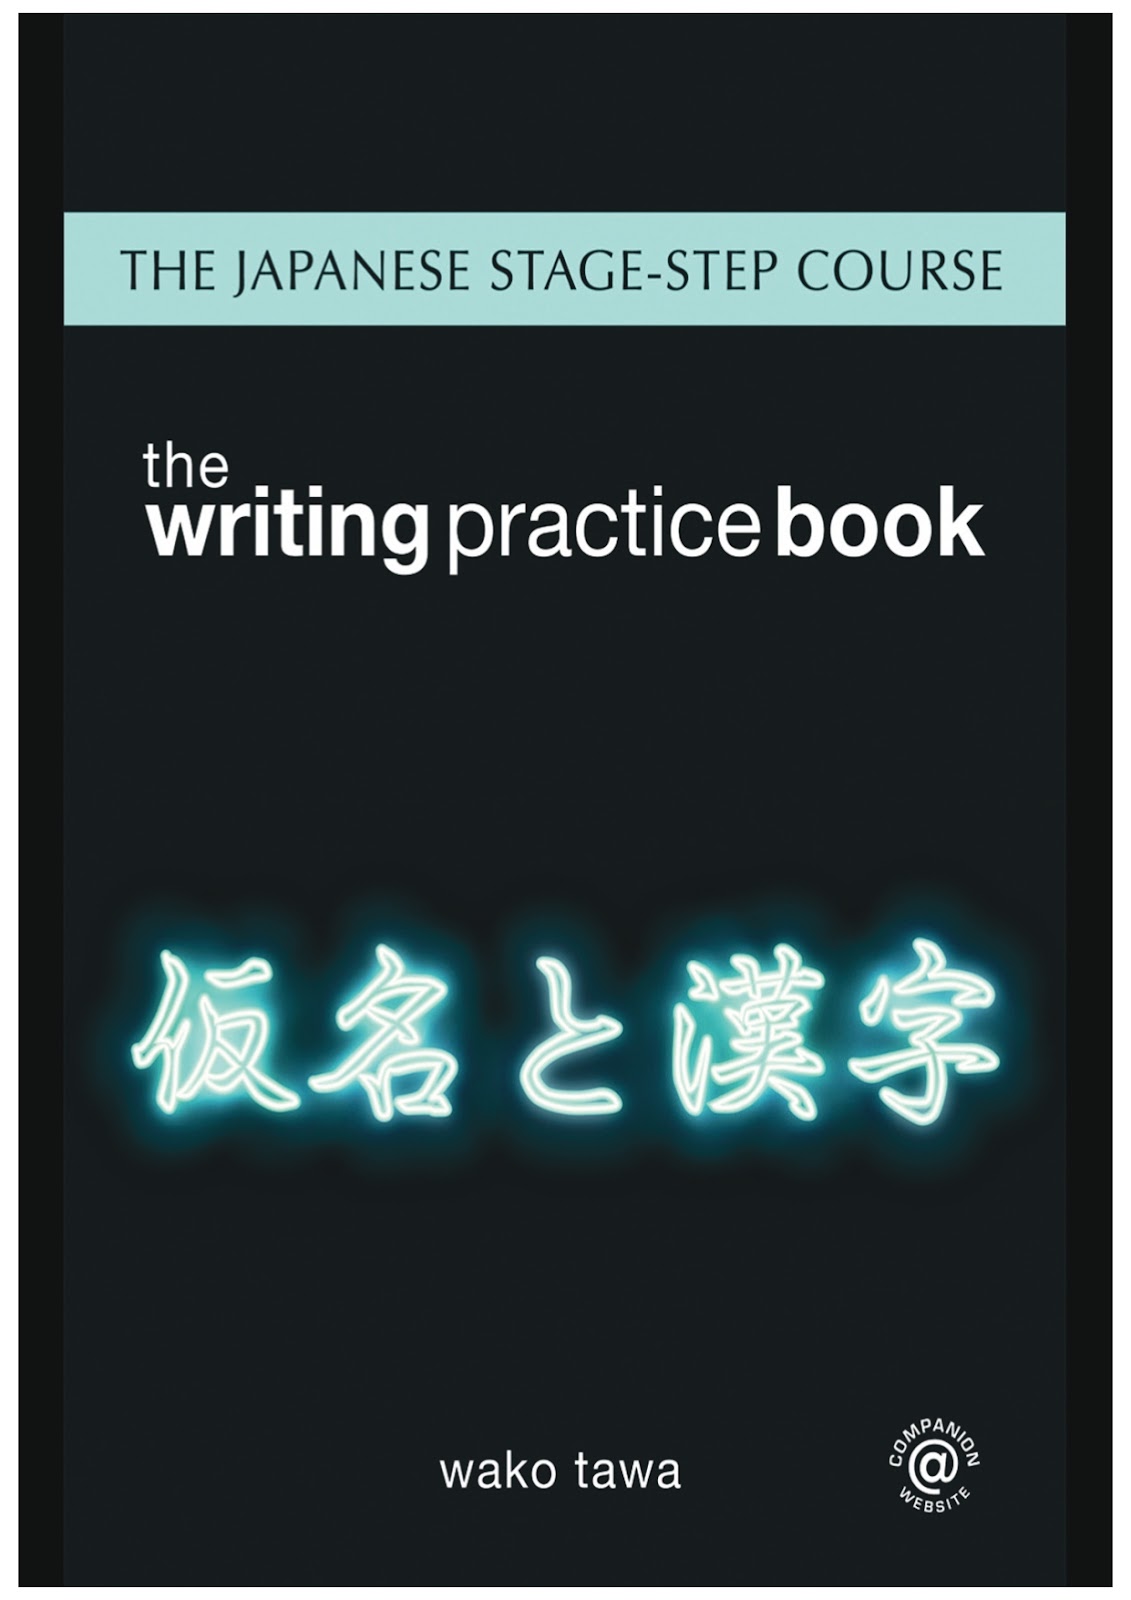 THE JAPANESE WRITING PRACTICE BOOK - N5 LEVEL